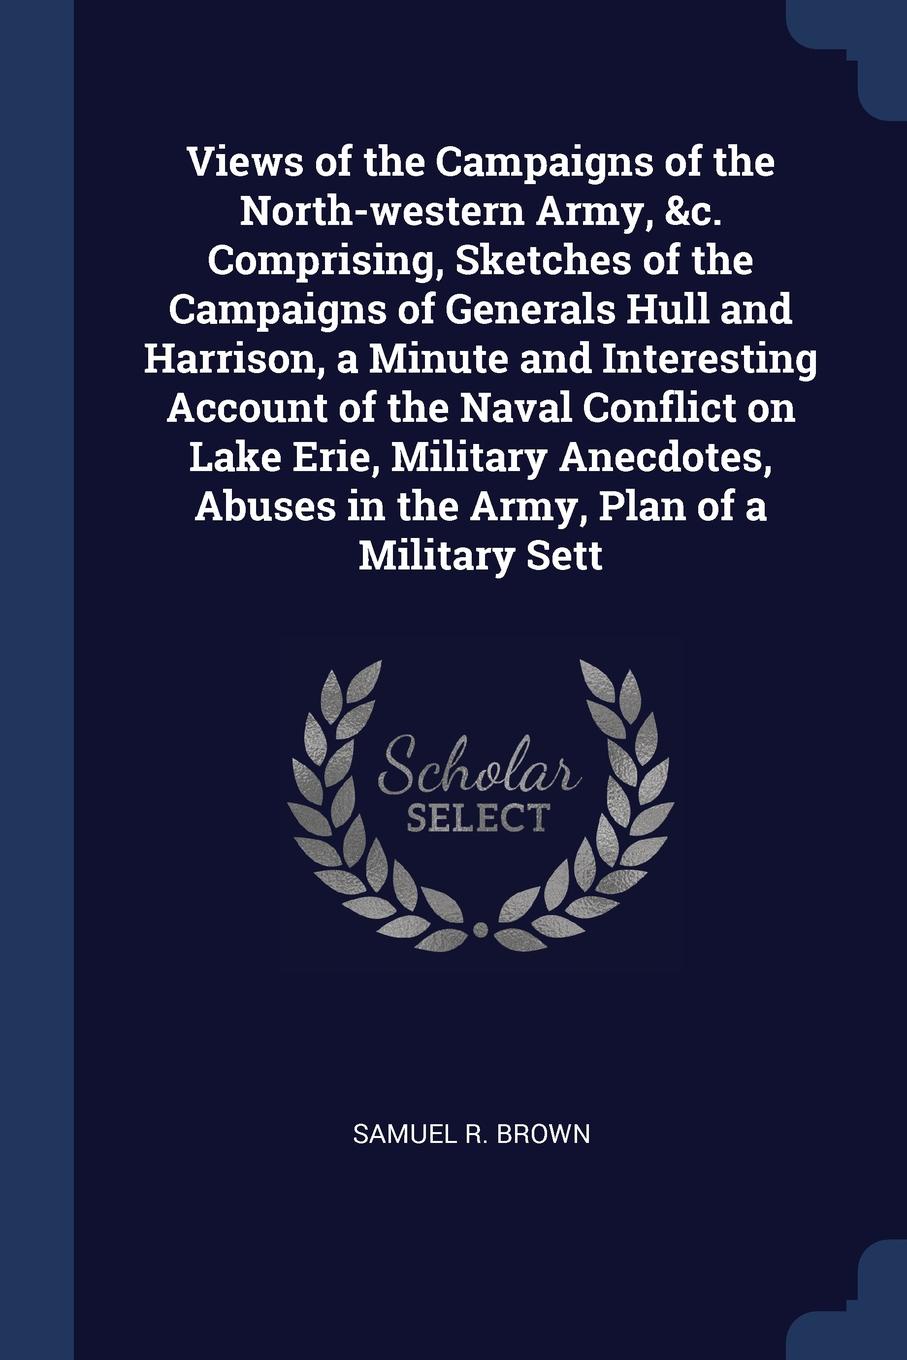 Views of the Campaigns of the North-western Army, &c. Comprising, Sketches of the Campaigns of Generals Hull and Harrison, a Minute and Interesting Account of the Naval Conflict on Lake Erie, Military Anecdotes, Abuses in the Army, Plan of a Milit...